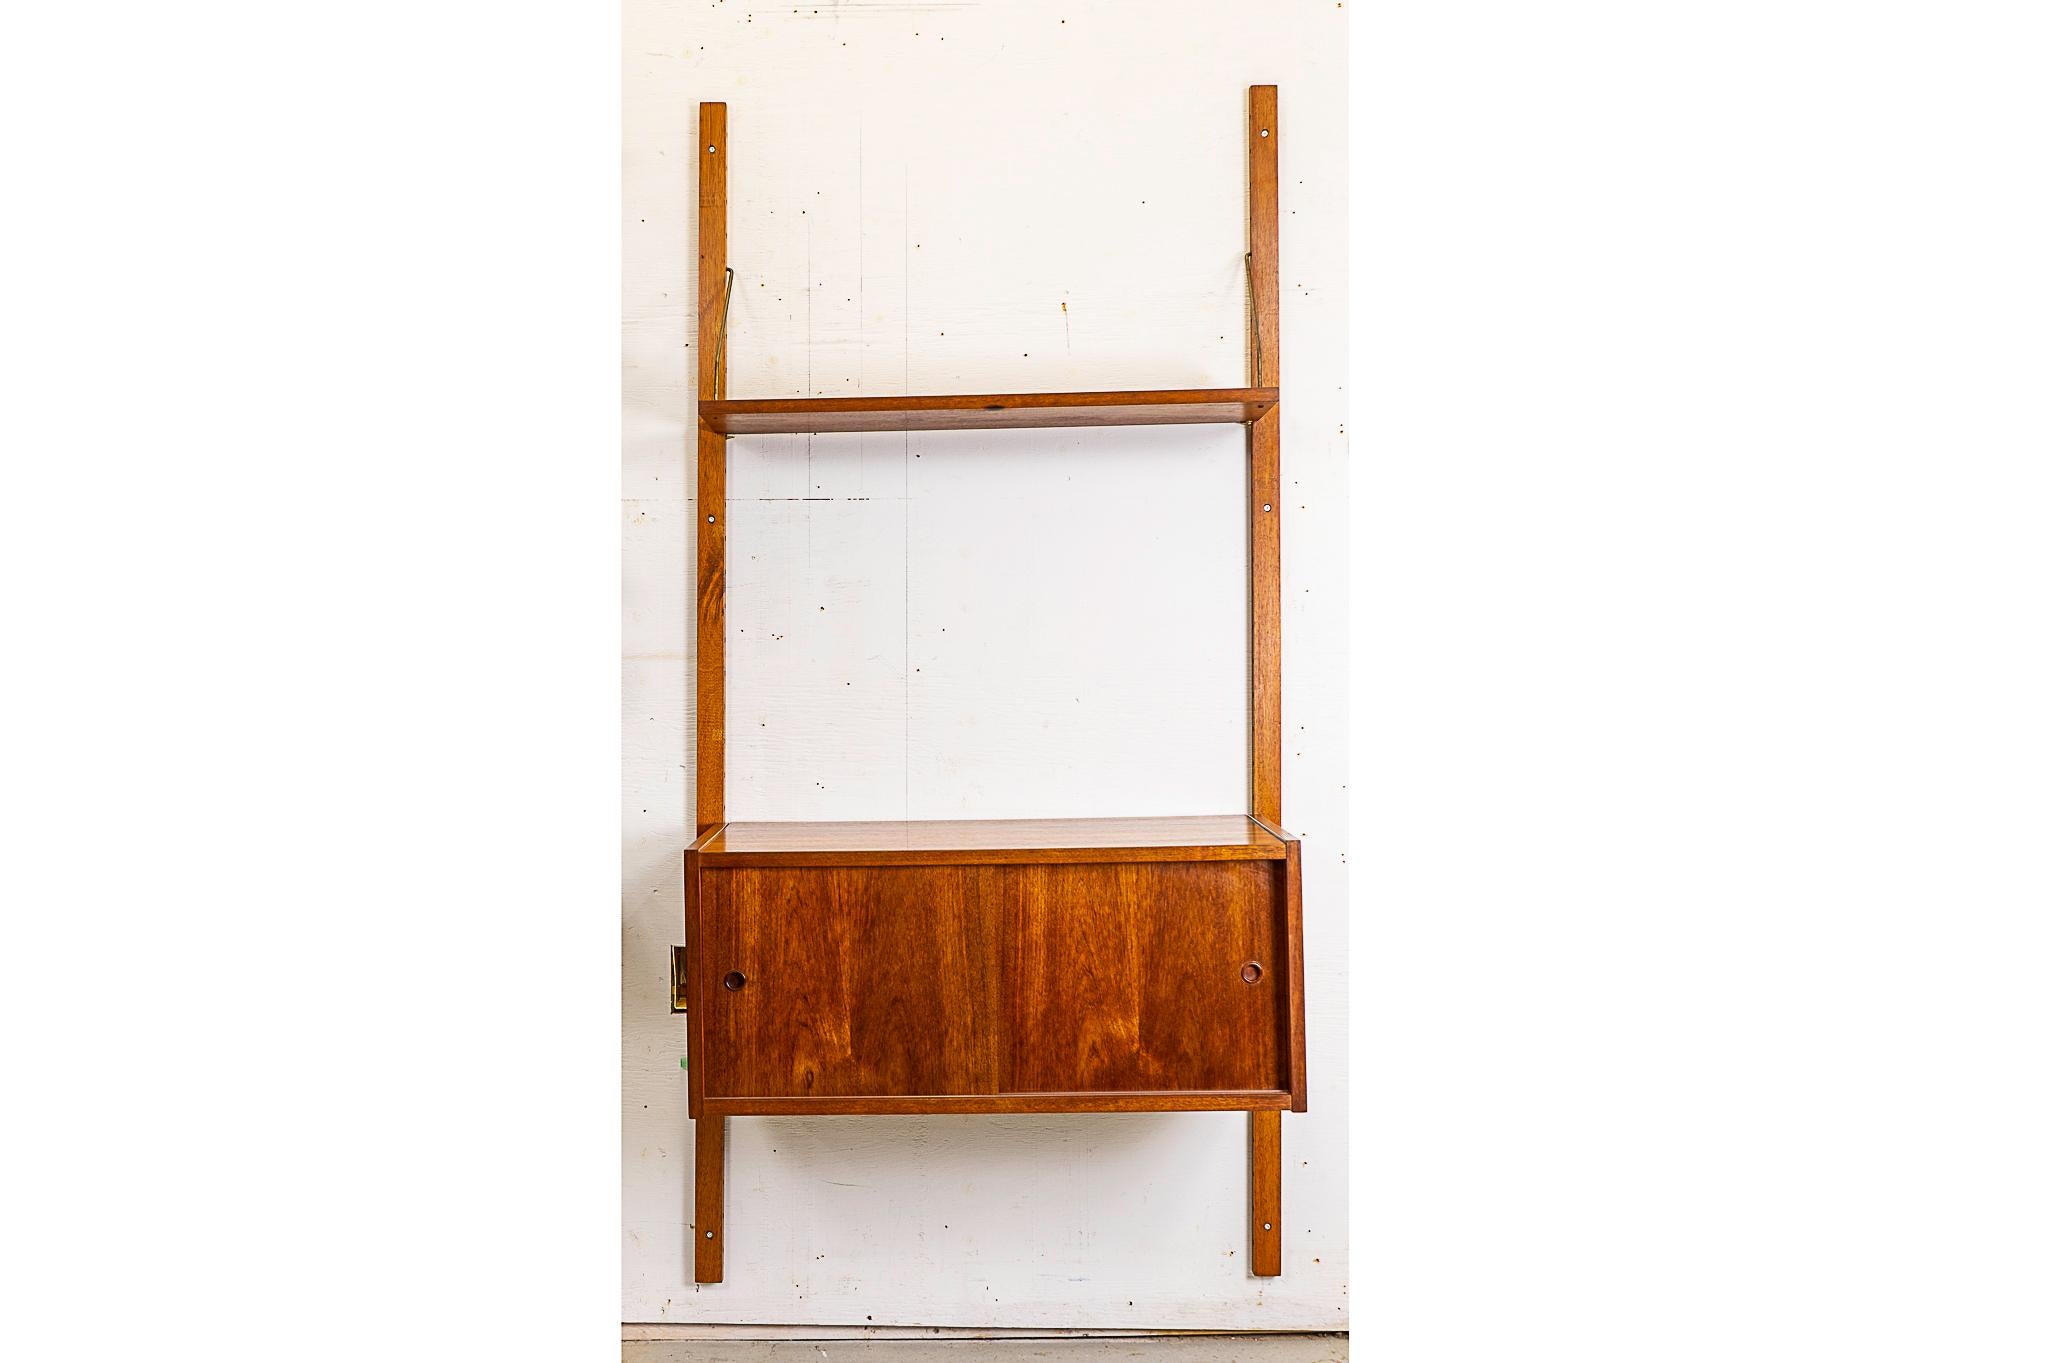 Teak Danish single bank wall system, circa 1960's. Sliding door cabinet with interior shelf and single adjustable upper shelf.

Please inquire for international and remote shipping rates.